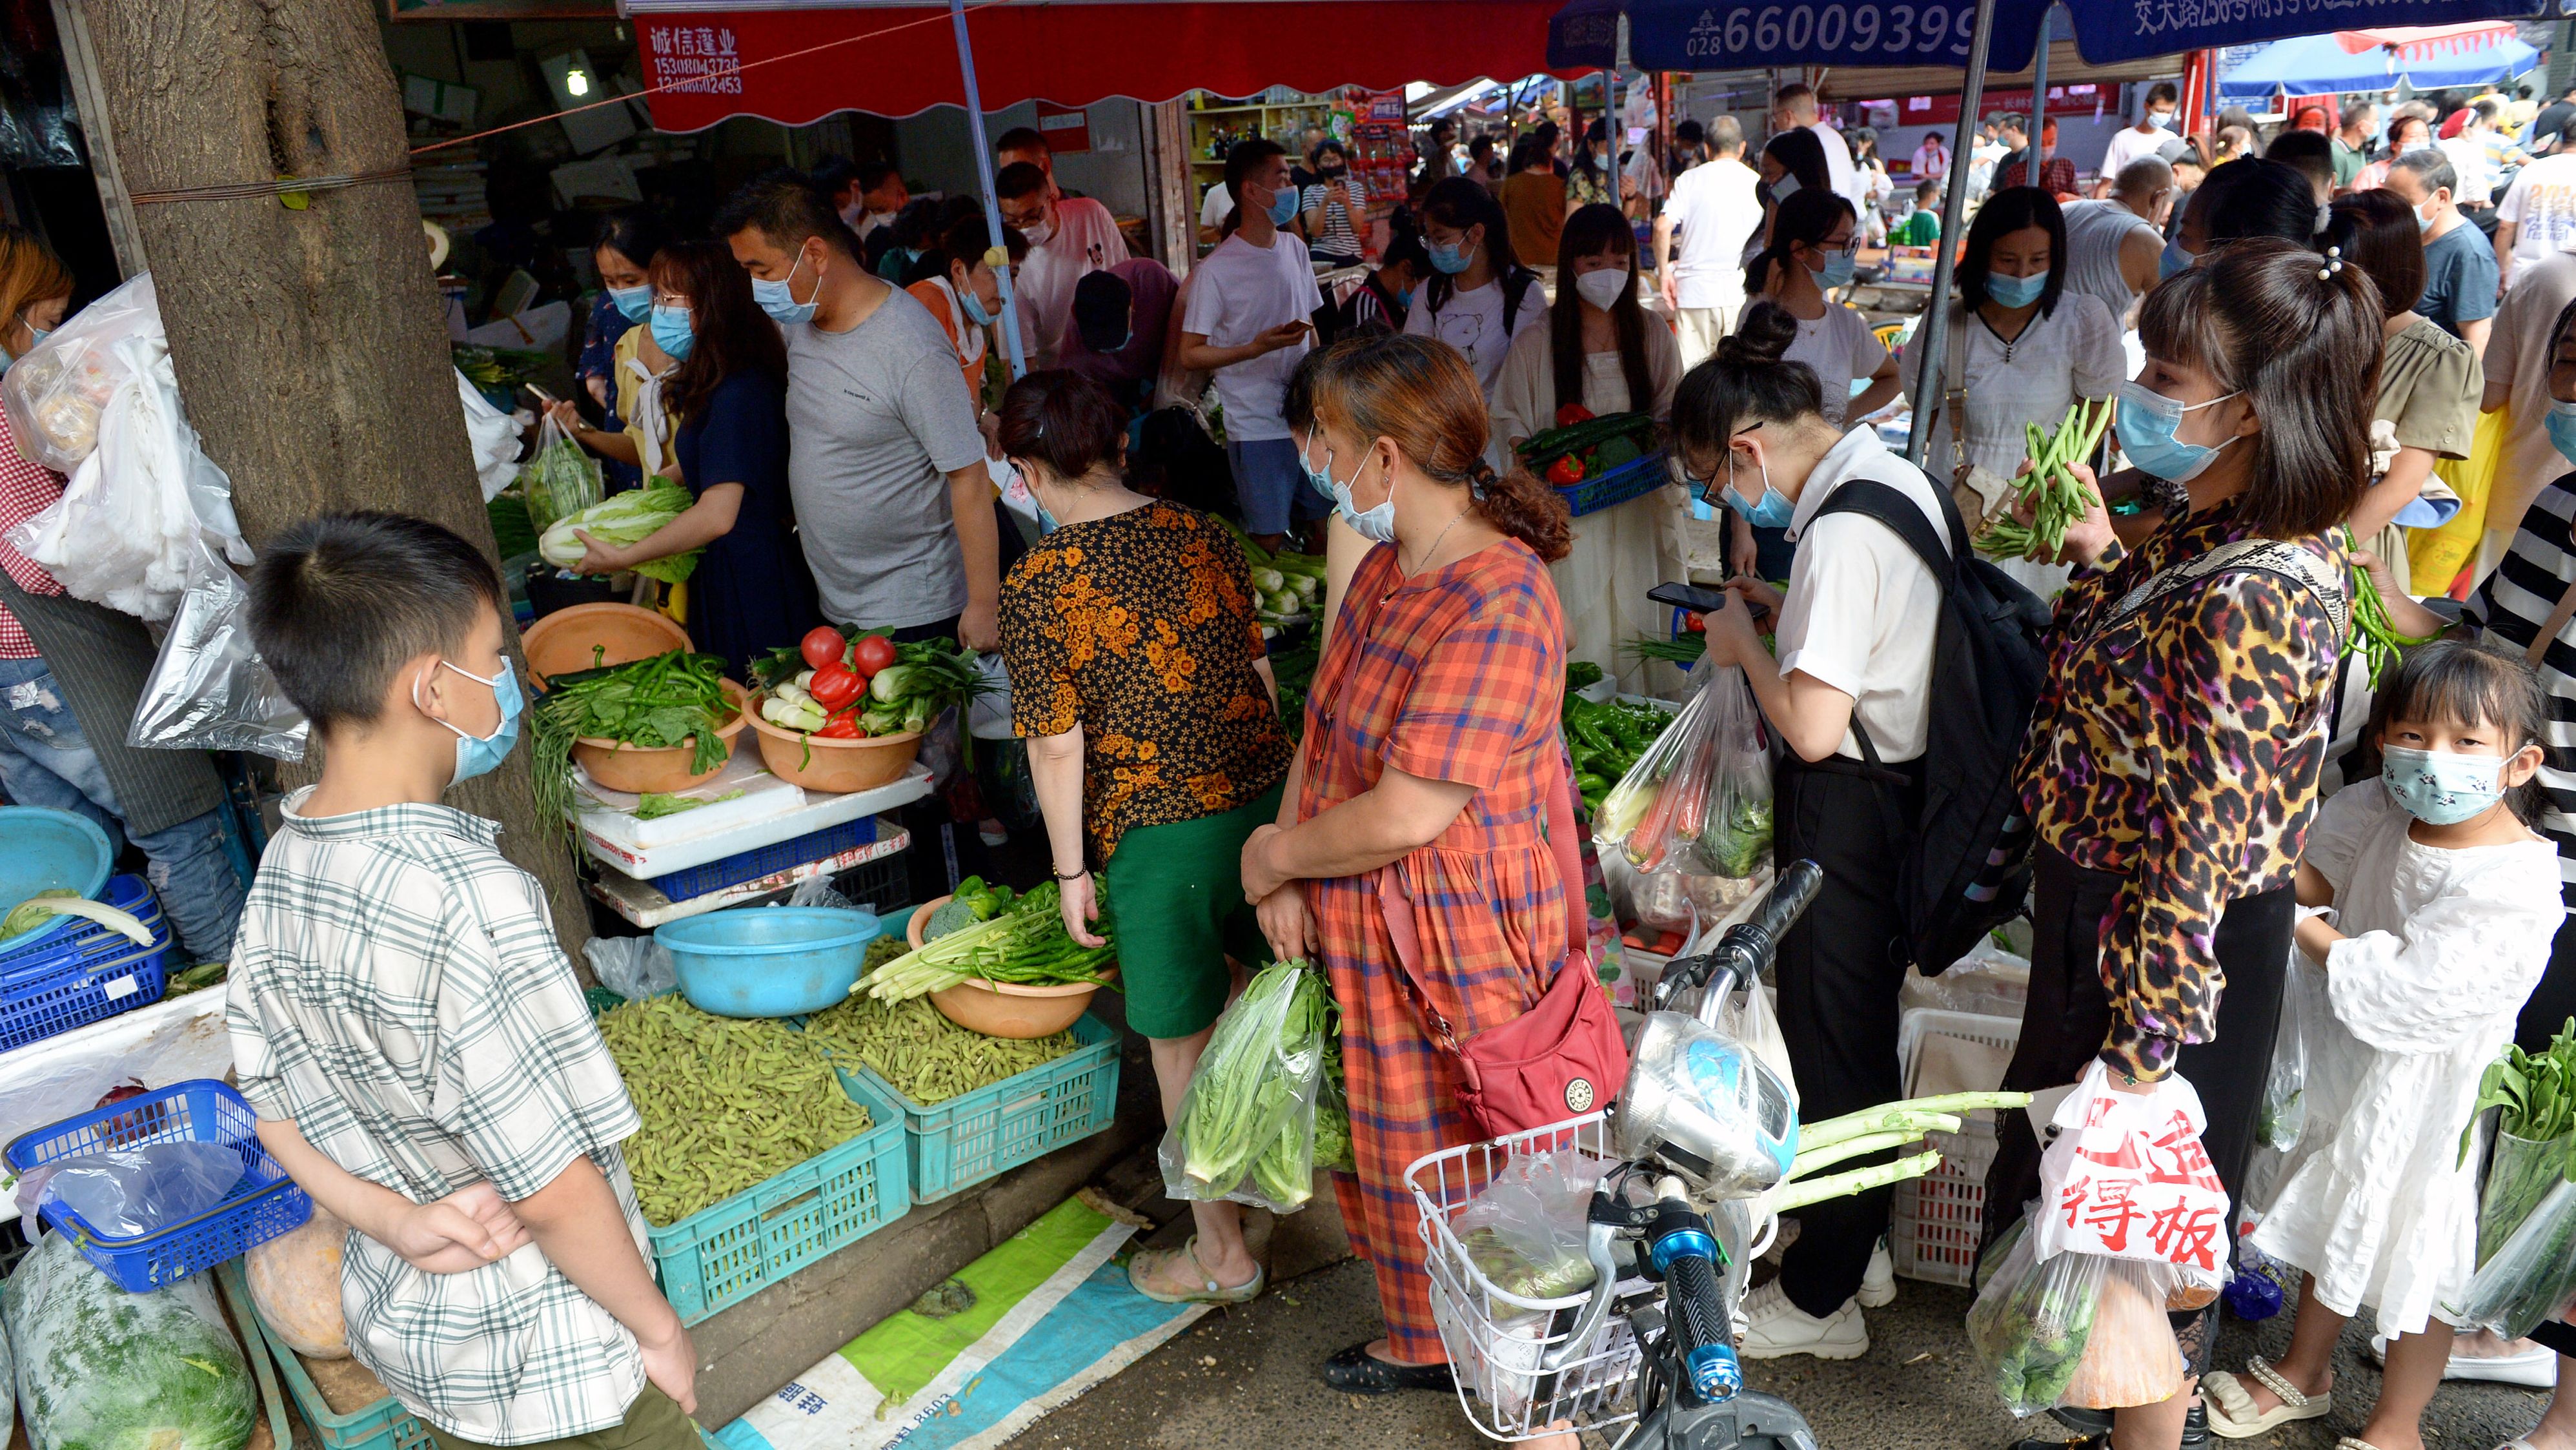 Chengdu residents rush to buy groceries before the lockdown comes into force. 